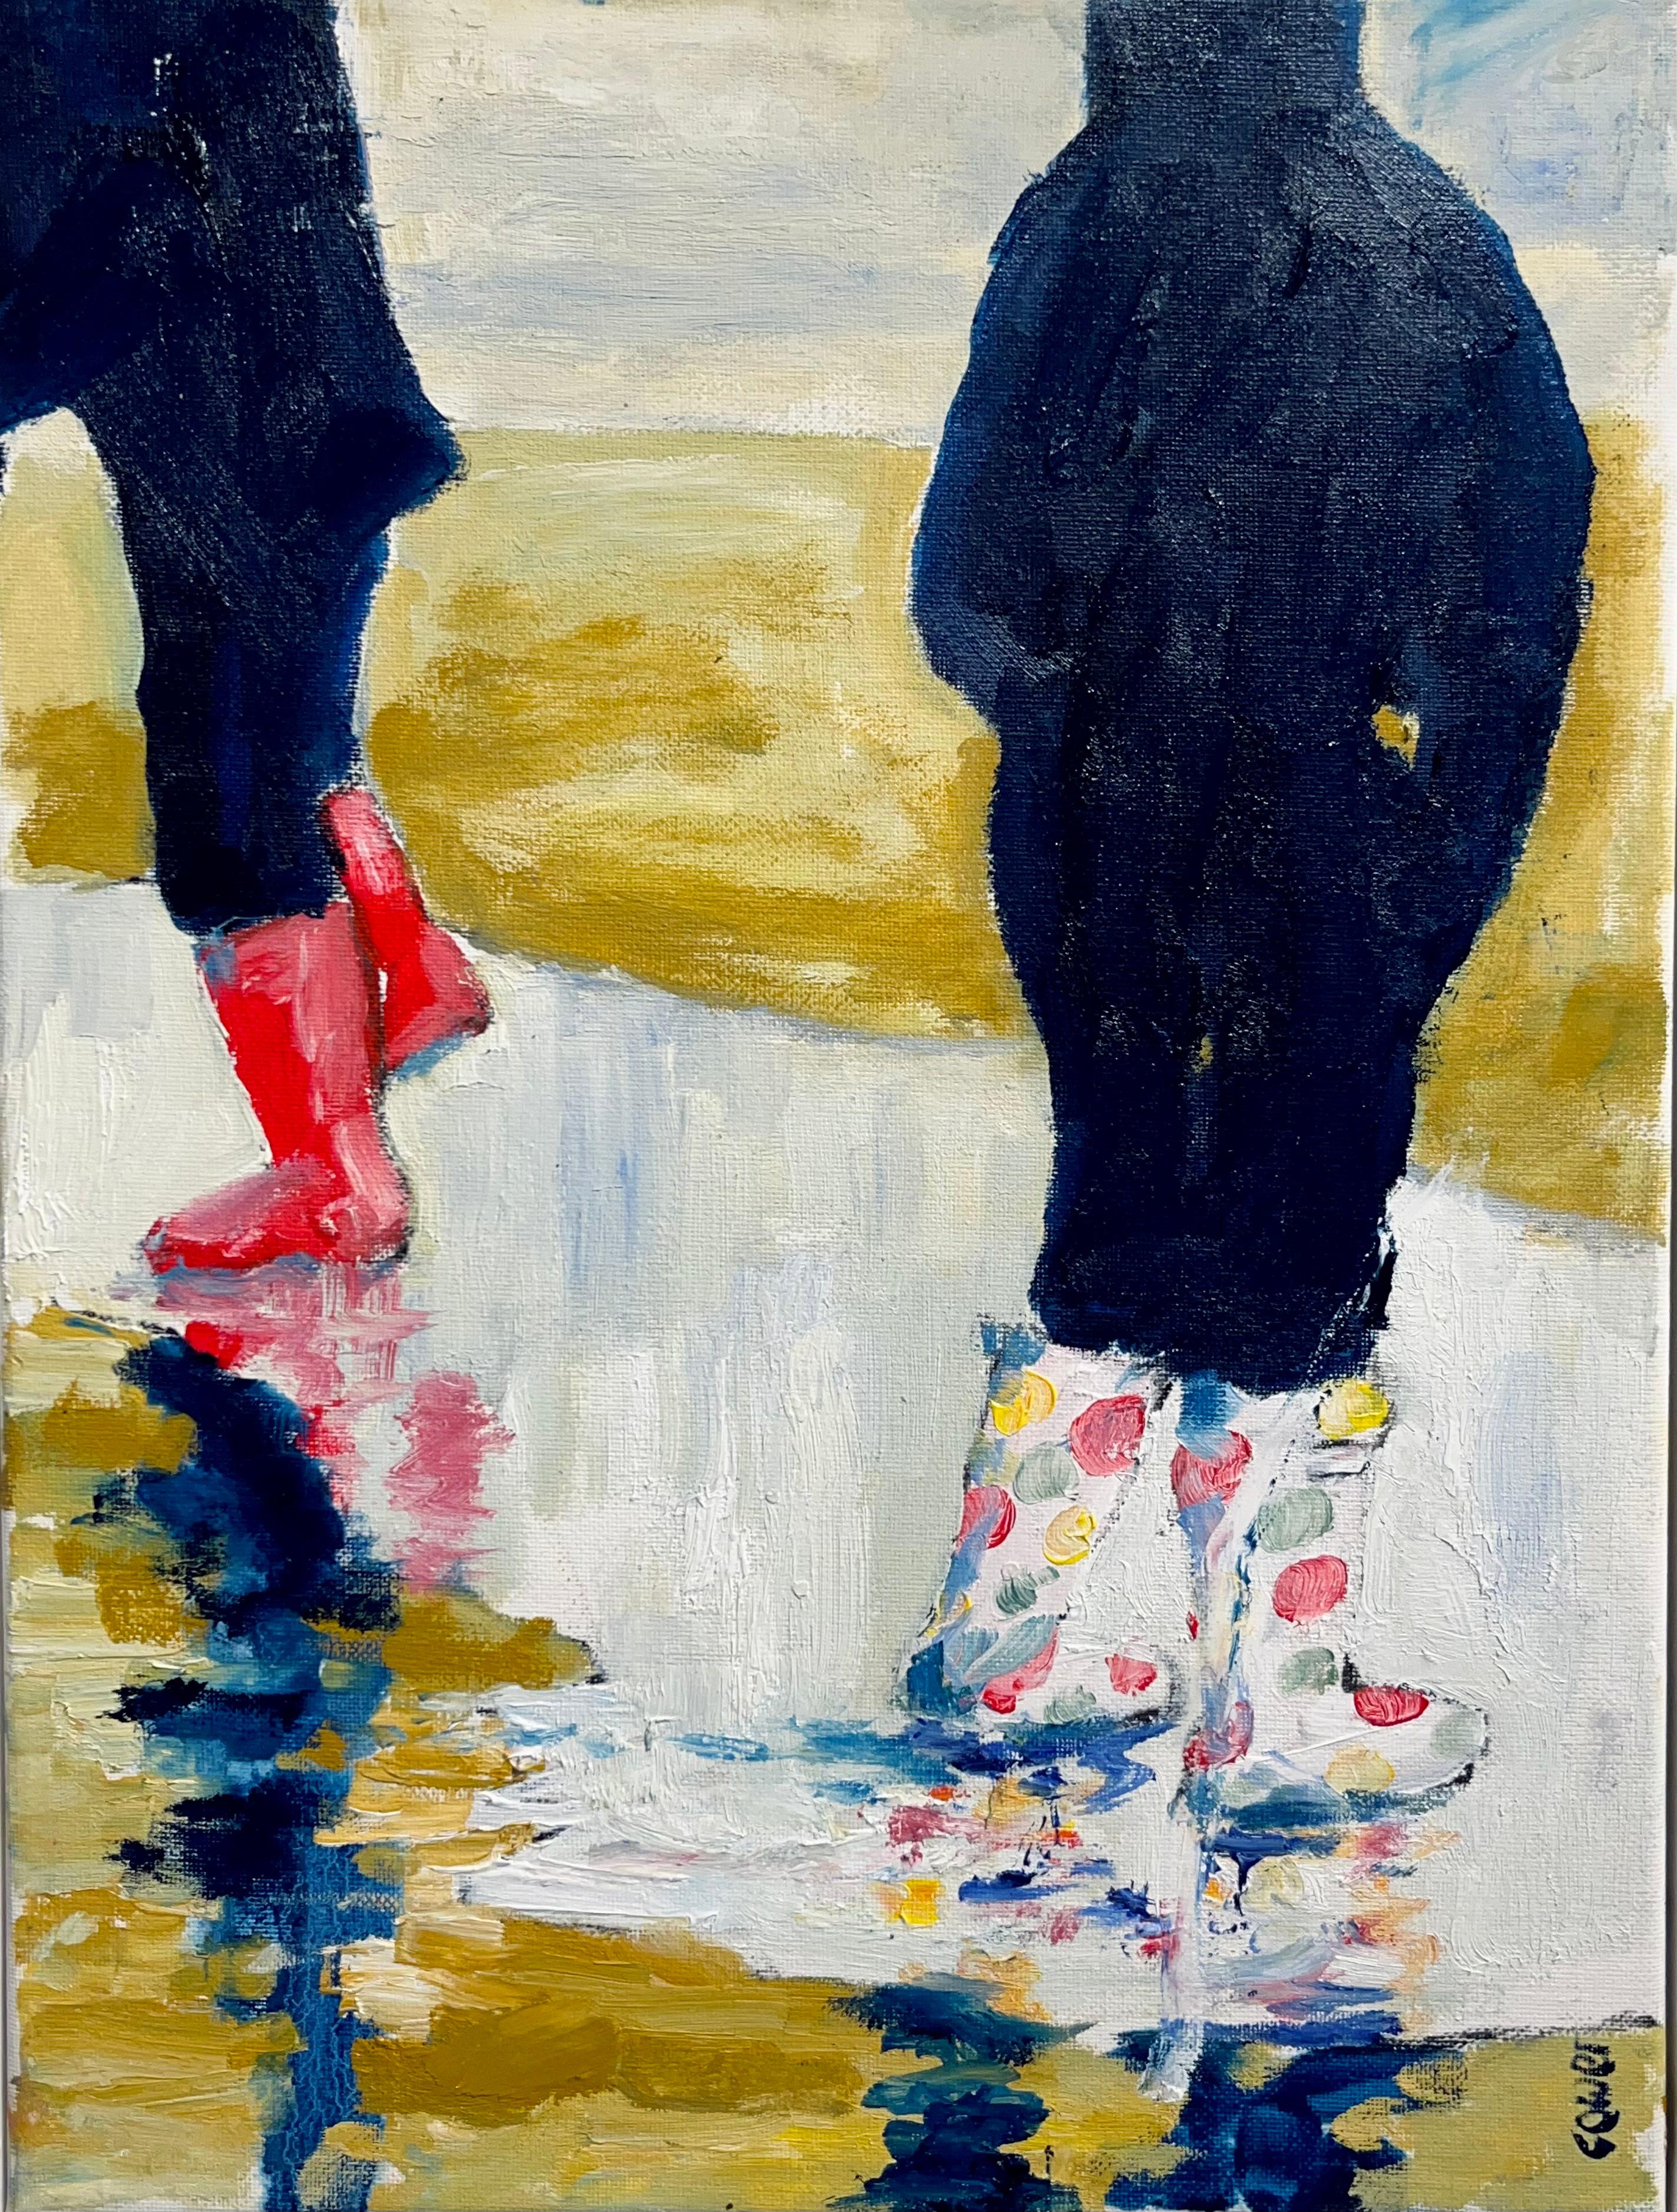 Wellies II- contemporary landscape art - Impressionist figurative oil painting